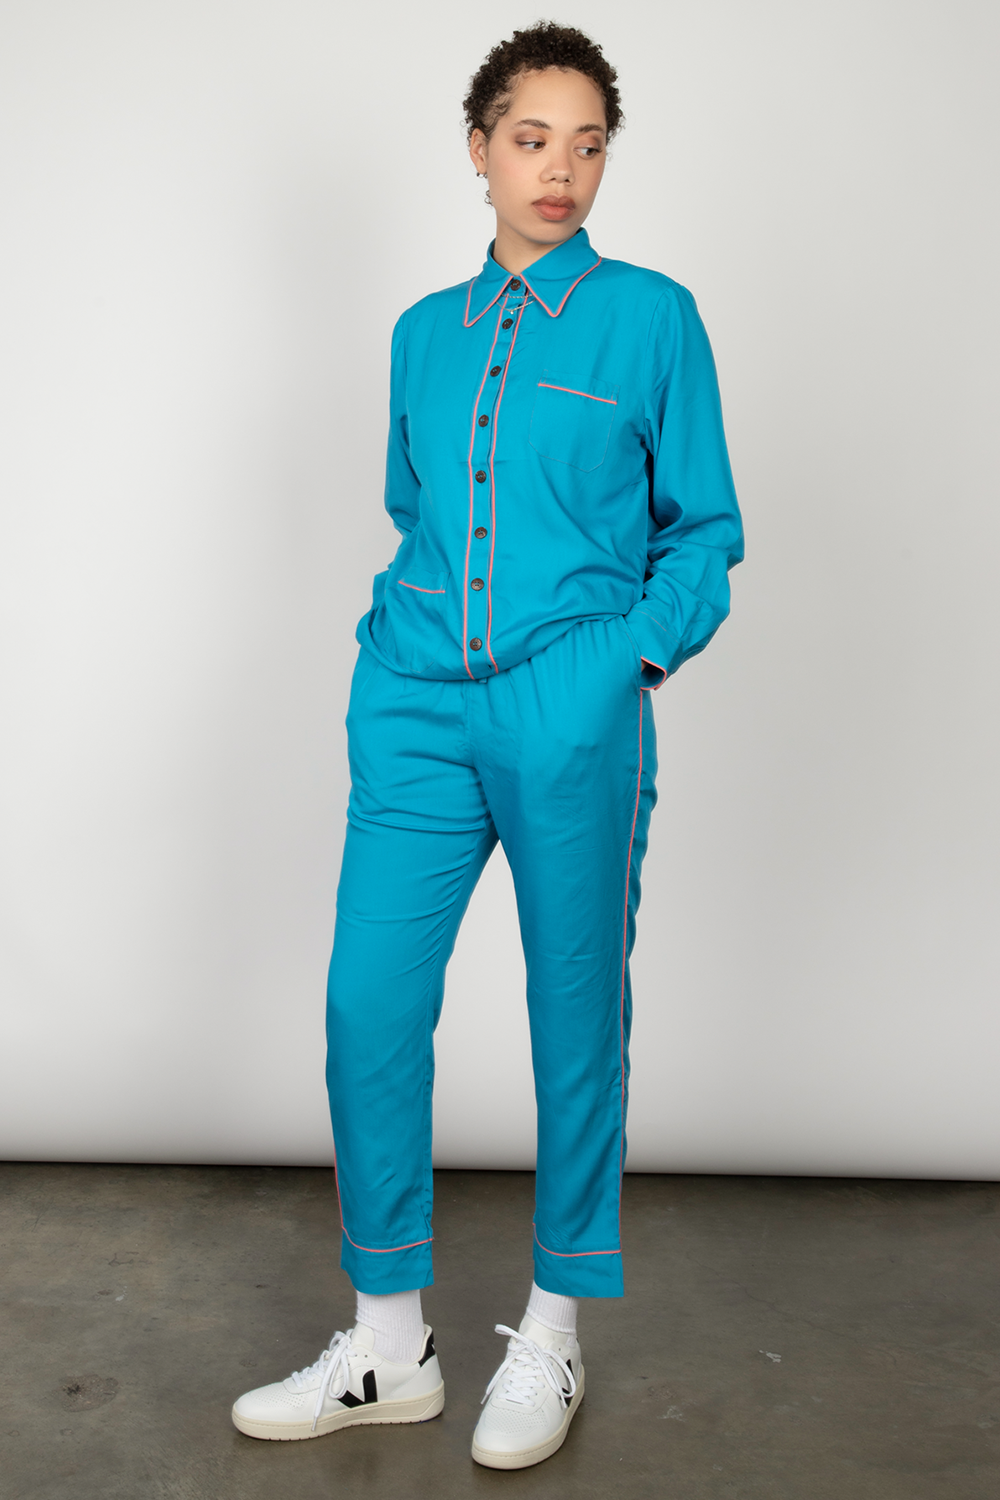 Blue long-sleeved pajama set with contrasting coral piping.